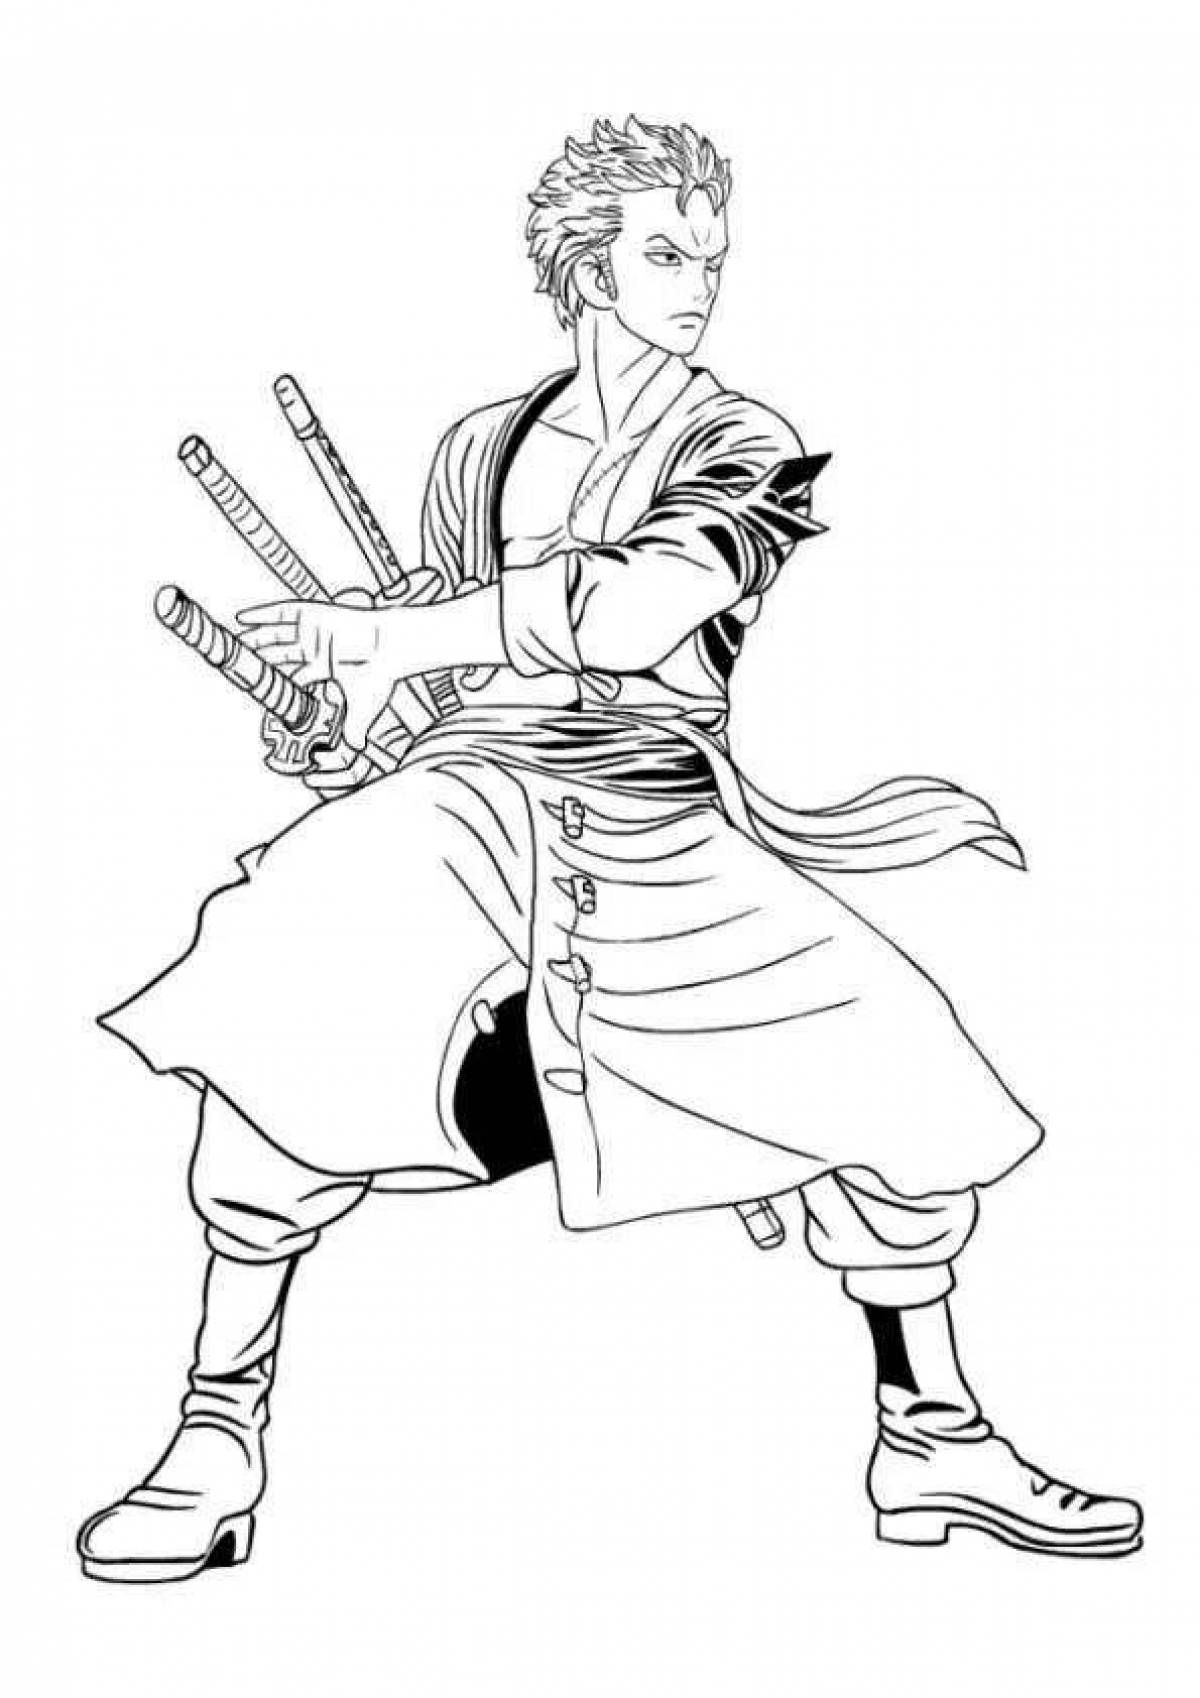 Zoro one piece coloring page